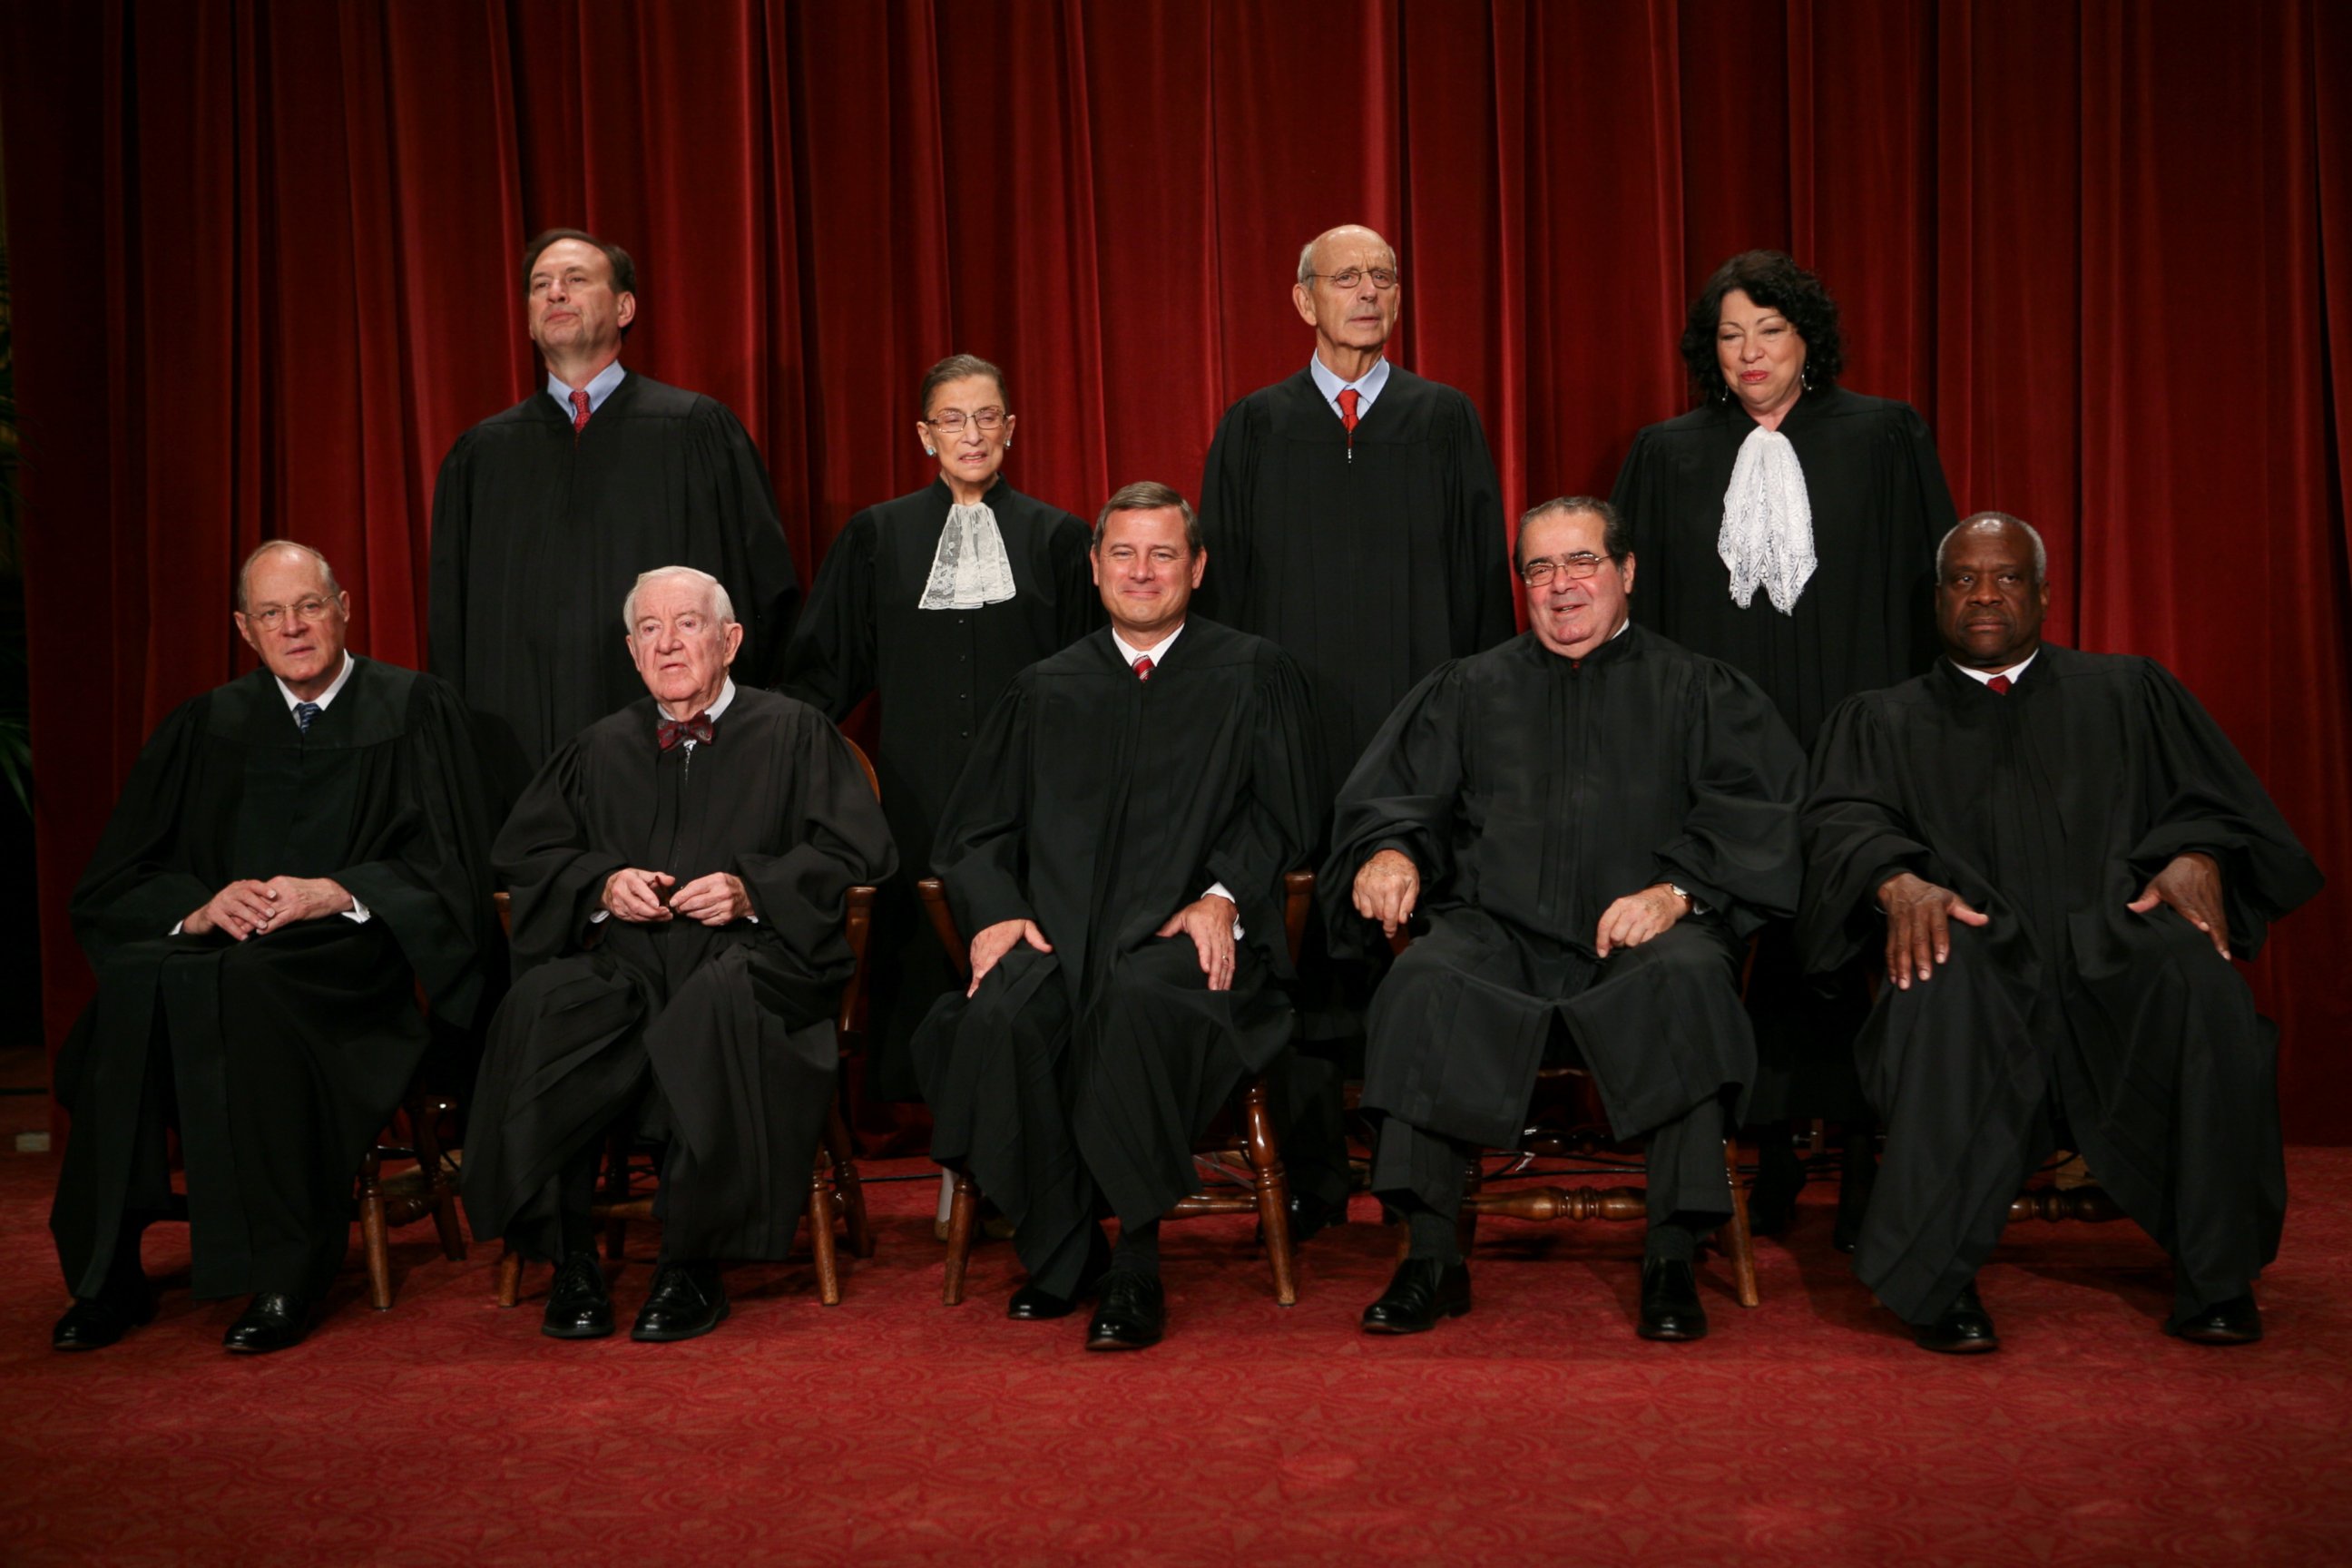 PHOTO: The Supreme Court Justices of the United States posed for their official family group photo in Washington, Sept. 29, 2009.